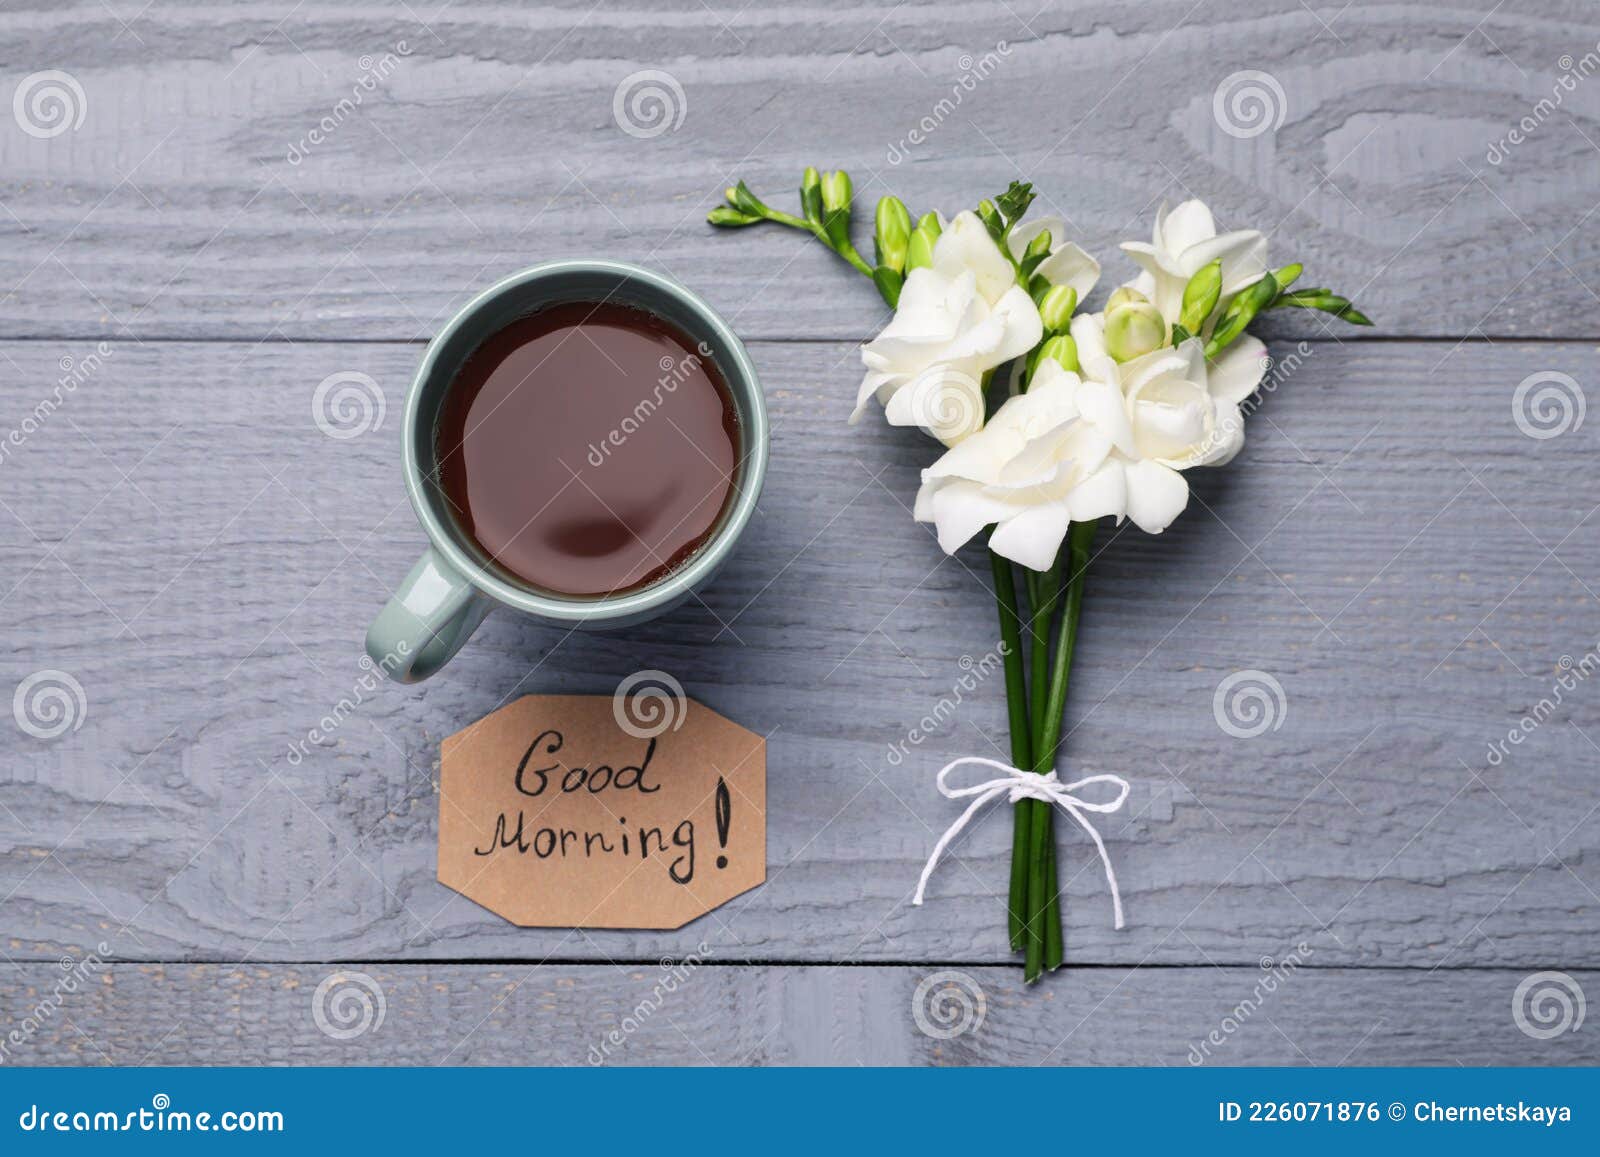 Fresh Tea, Flowers and Good Morning! Message on Grey Wooden Table ...